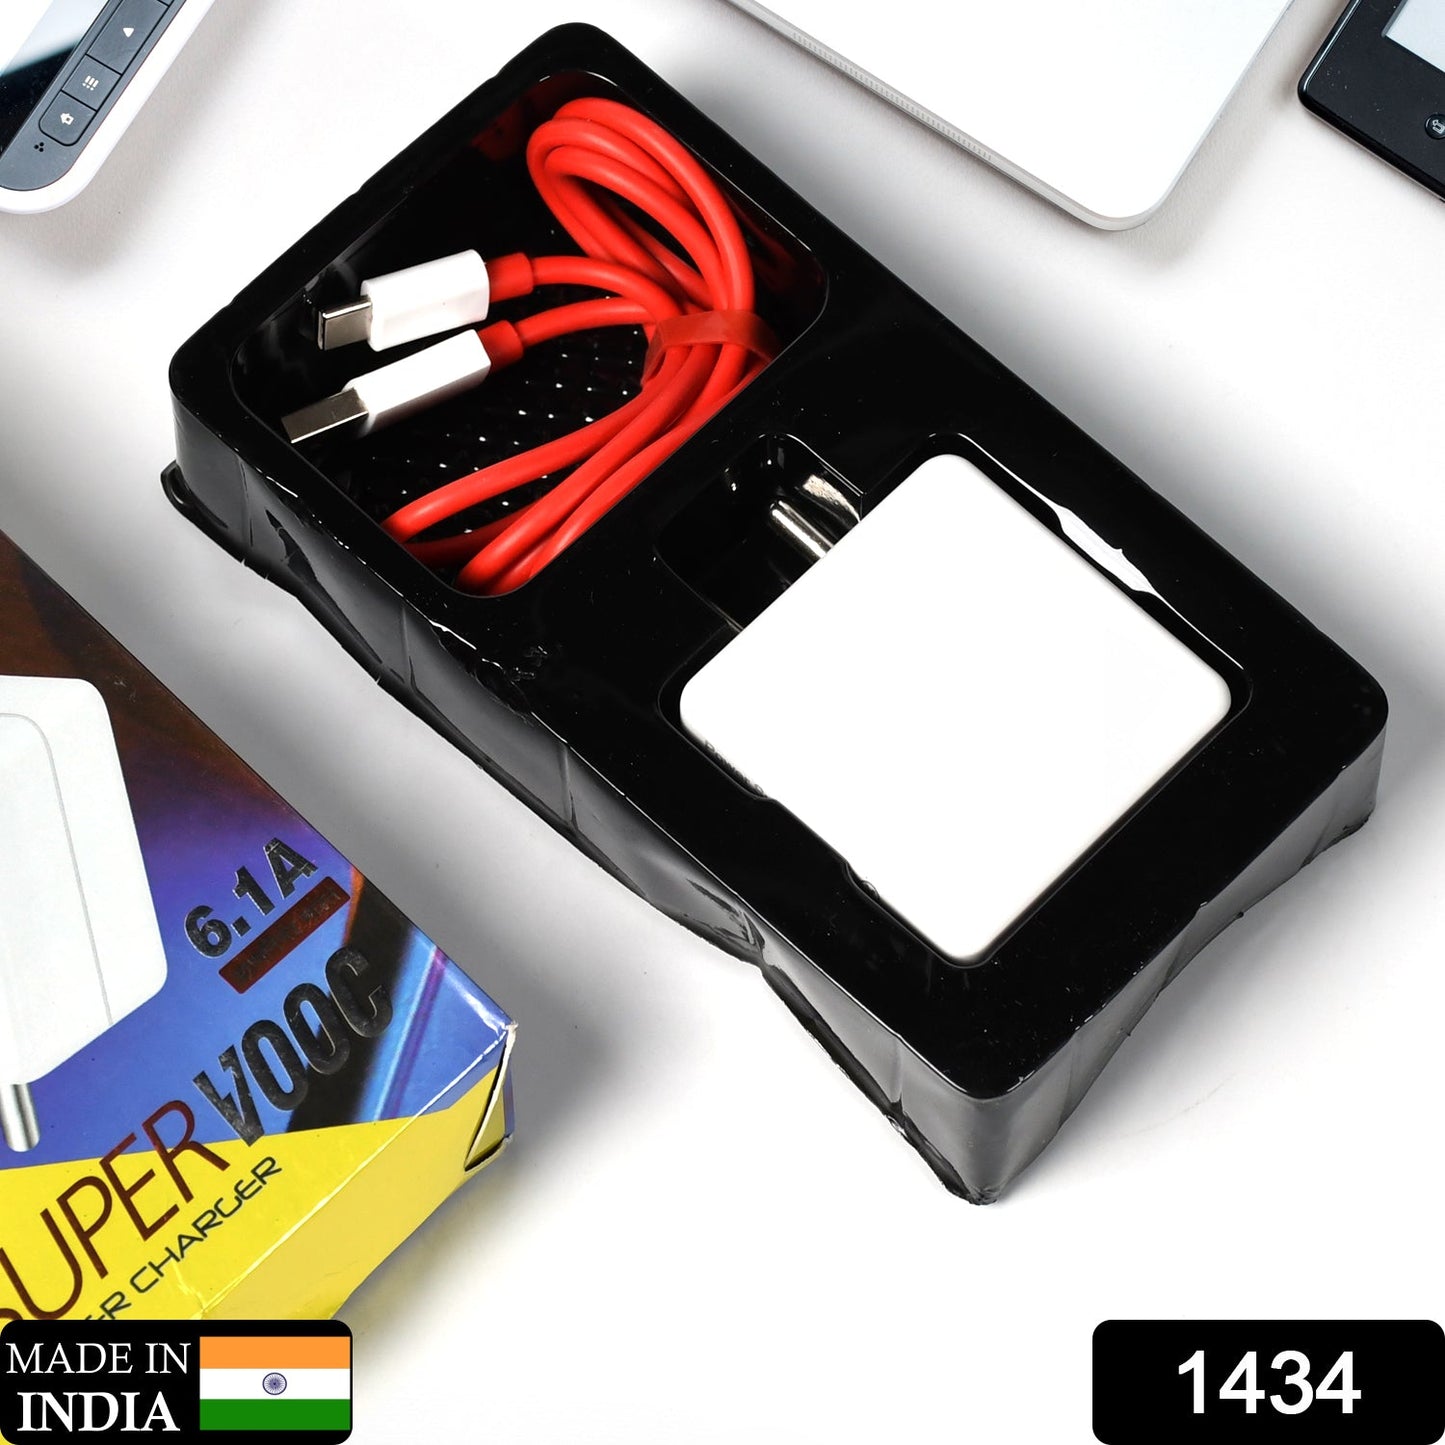 1434 Super Fast Charger With Cable for All iPhone, Android, Smart Phones, Tablets. JK Trends